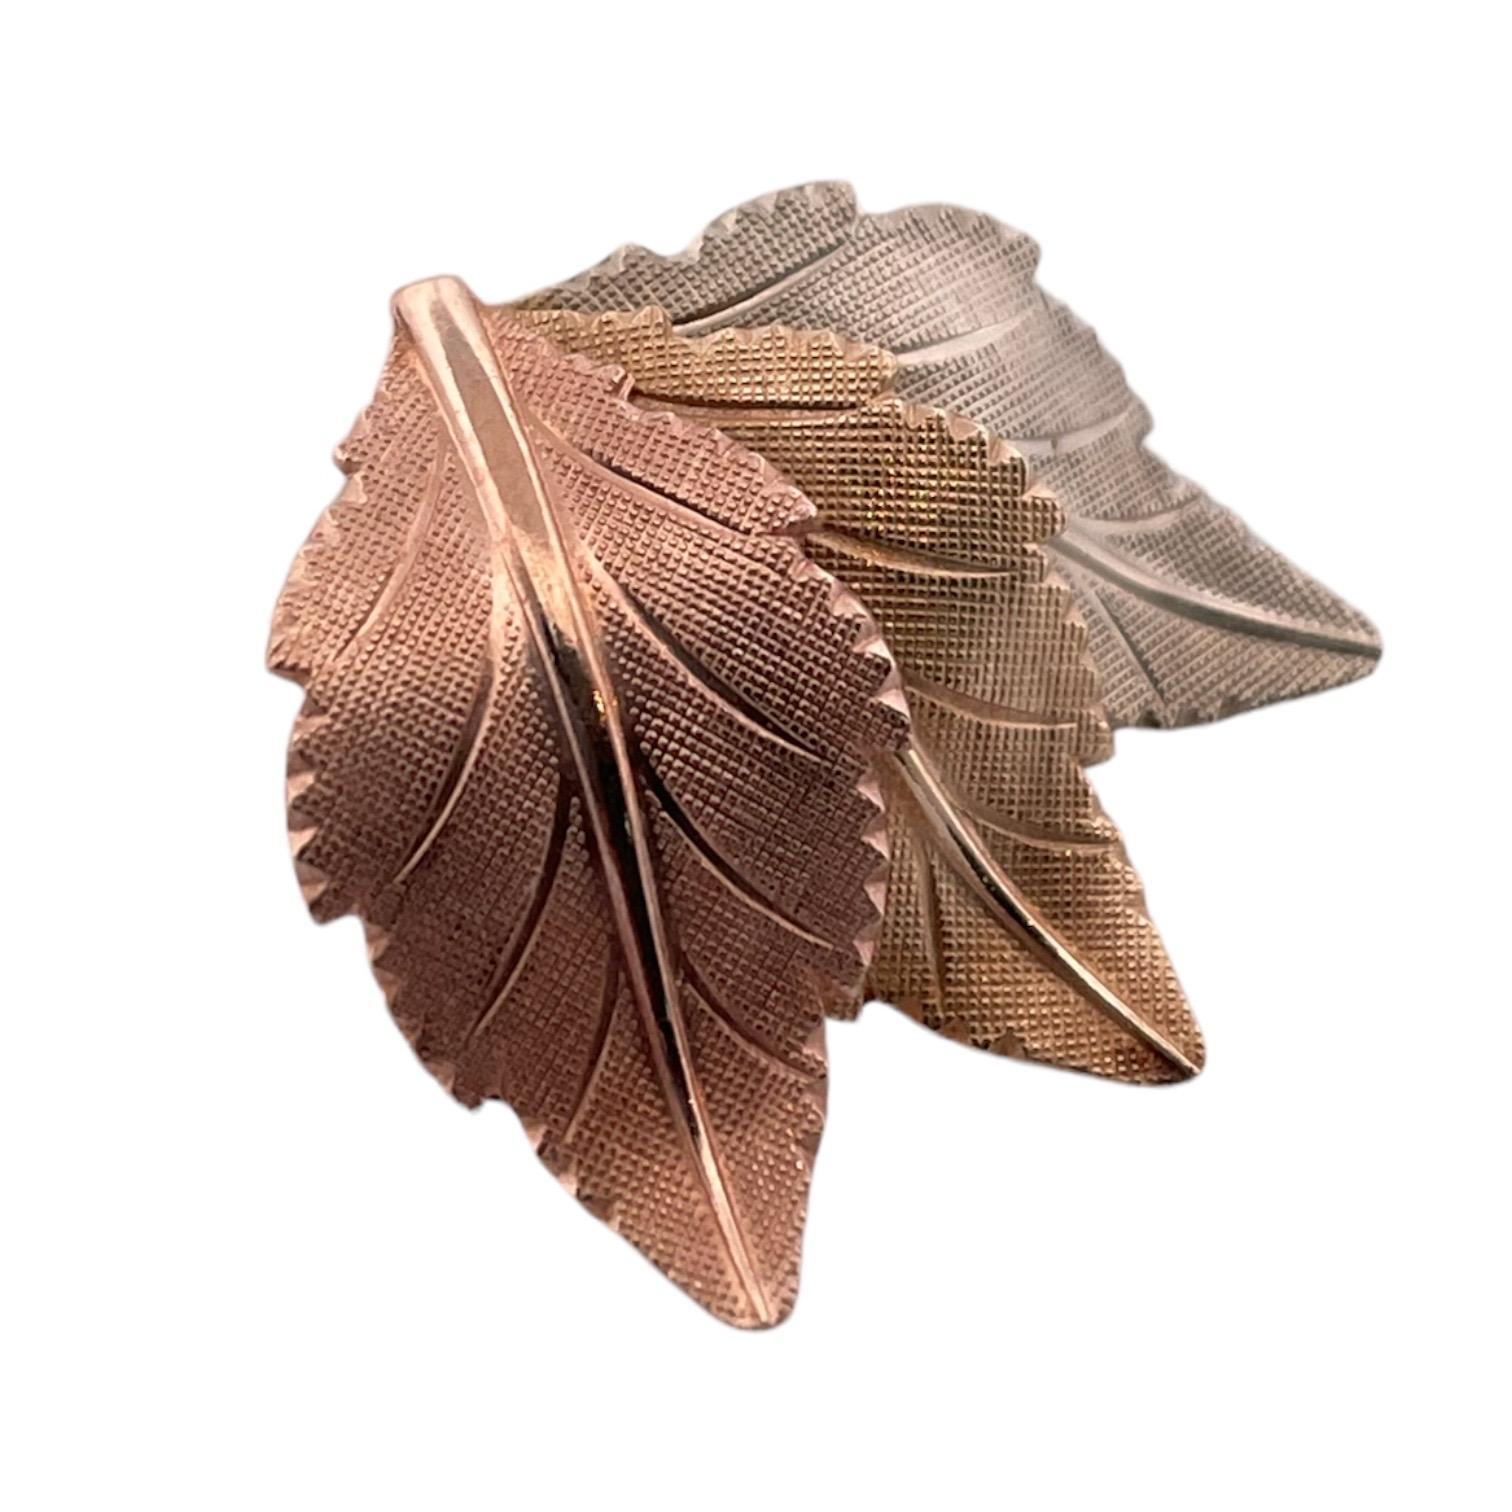 Embrace nature's elegance with these 3.49g Leaf Earrings, intricately designed with a textured finish in lustrous rose gold. Perfect for a touch of organic charm.
Material:14K Gold

Secure it today and experience the unparalleled beauty of this